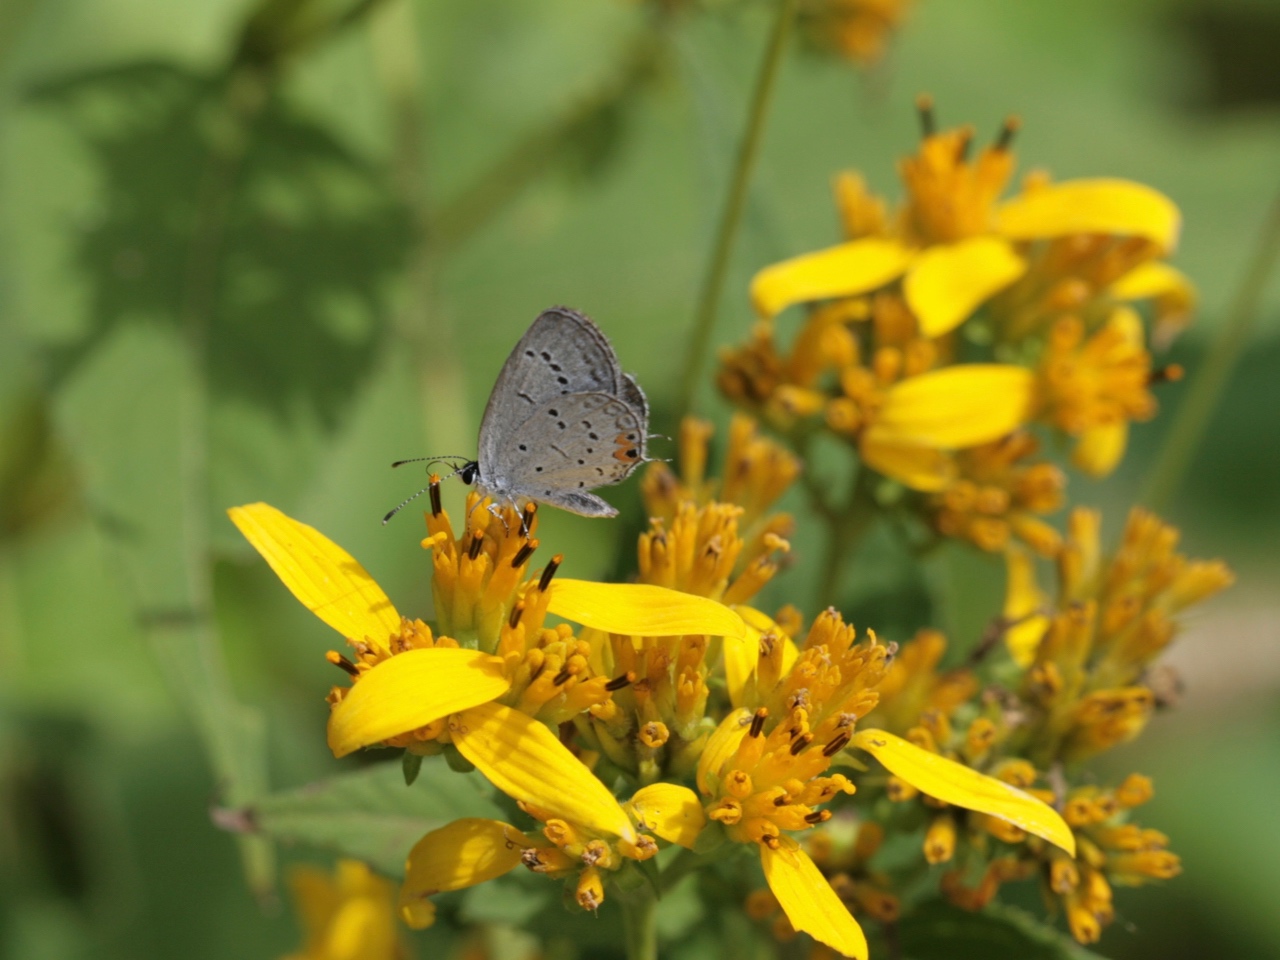 The Scientific Name is Verbesina occidentalis. You will likely hear them called Southern Crownbeard, Yellow Crownbeard, Stick-weed. This picture shows the Blooms with butterfly of Verbesina occidentalis